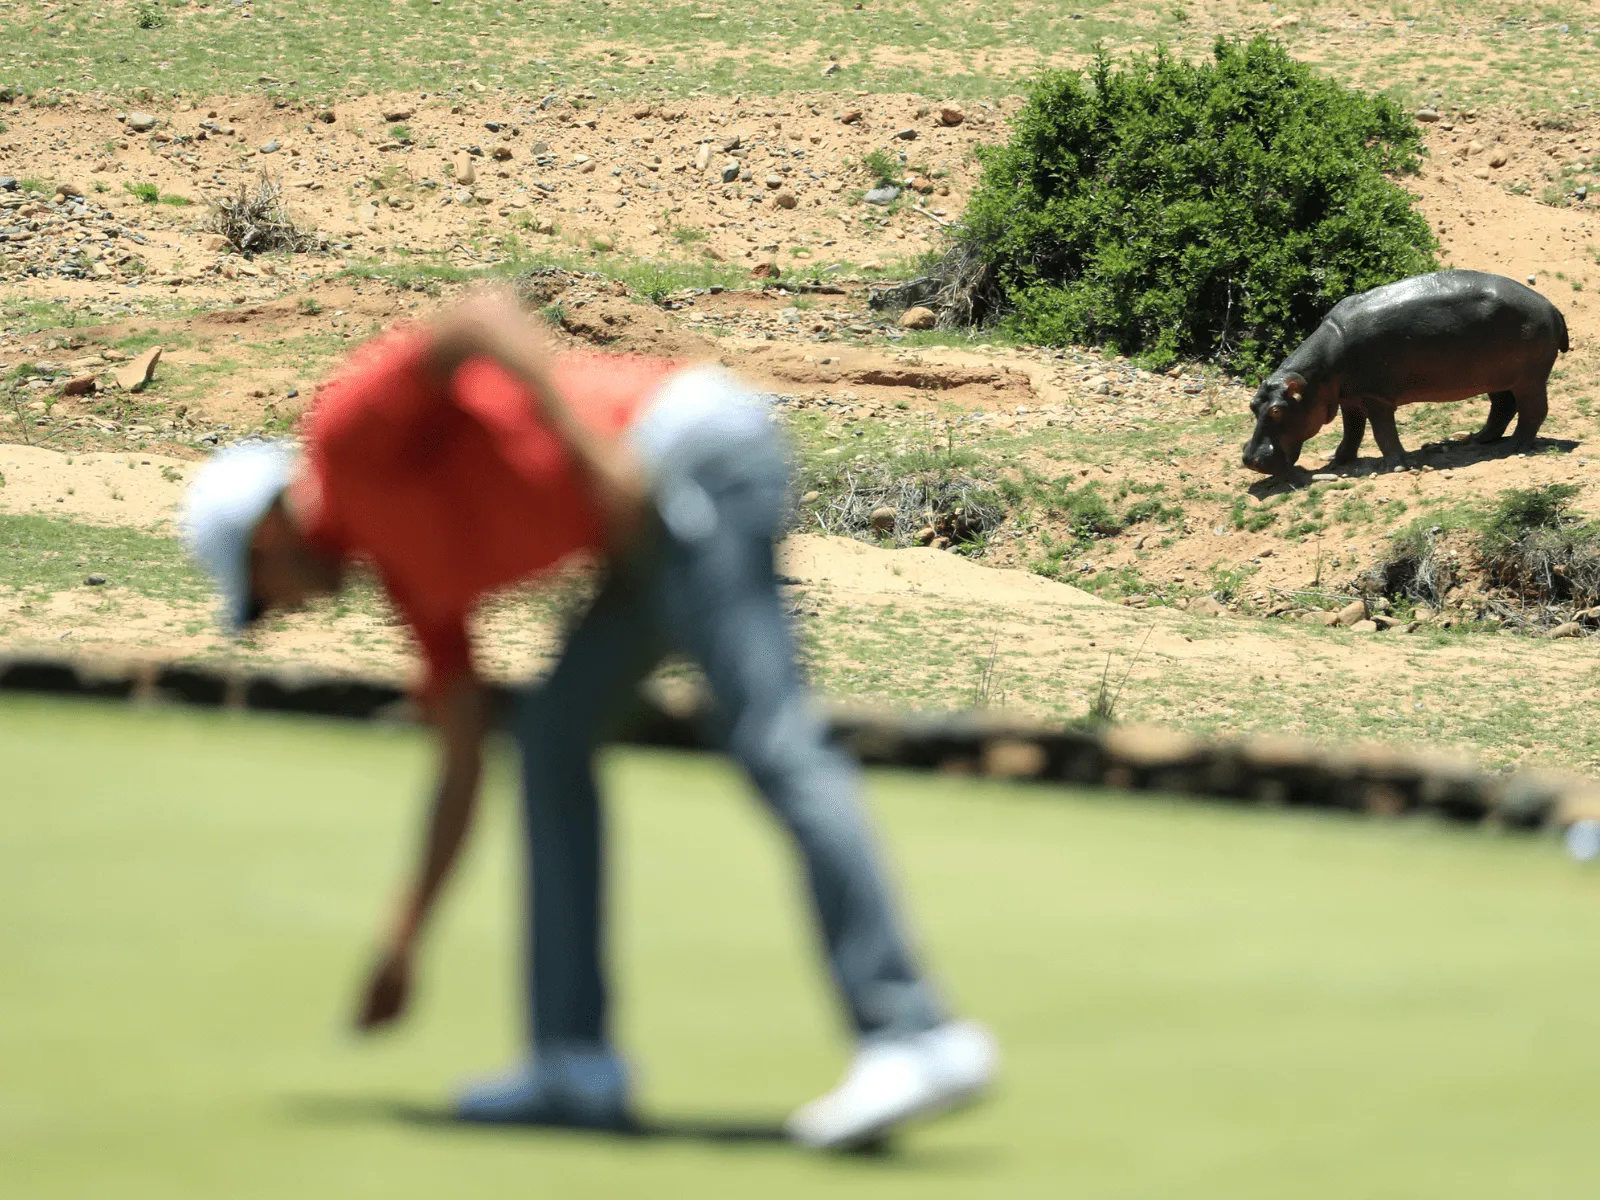 Wildlife coexisting alongside golfers on the course